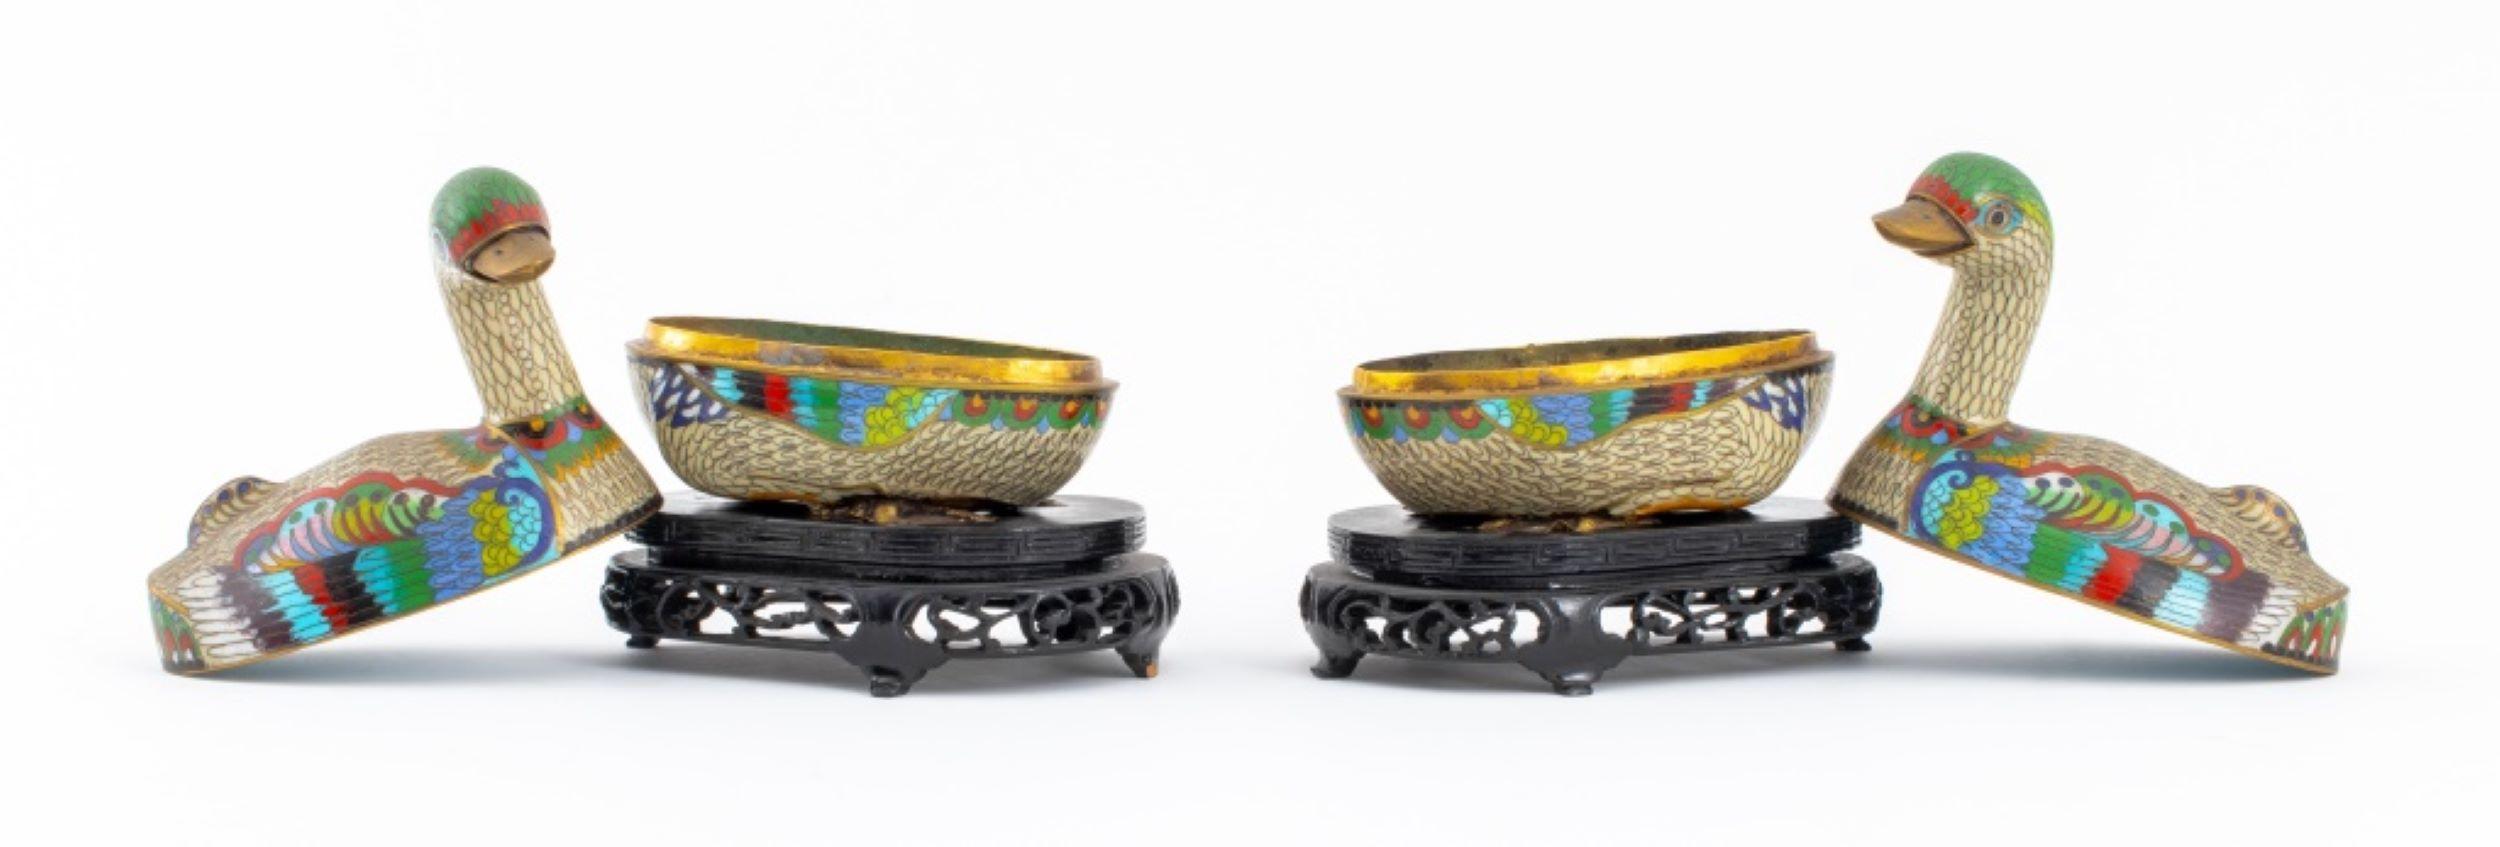 20th Century Chinese Cloisonne Enamel Bird Boxes, Pair For Sale